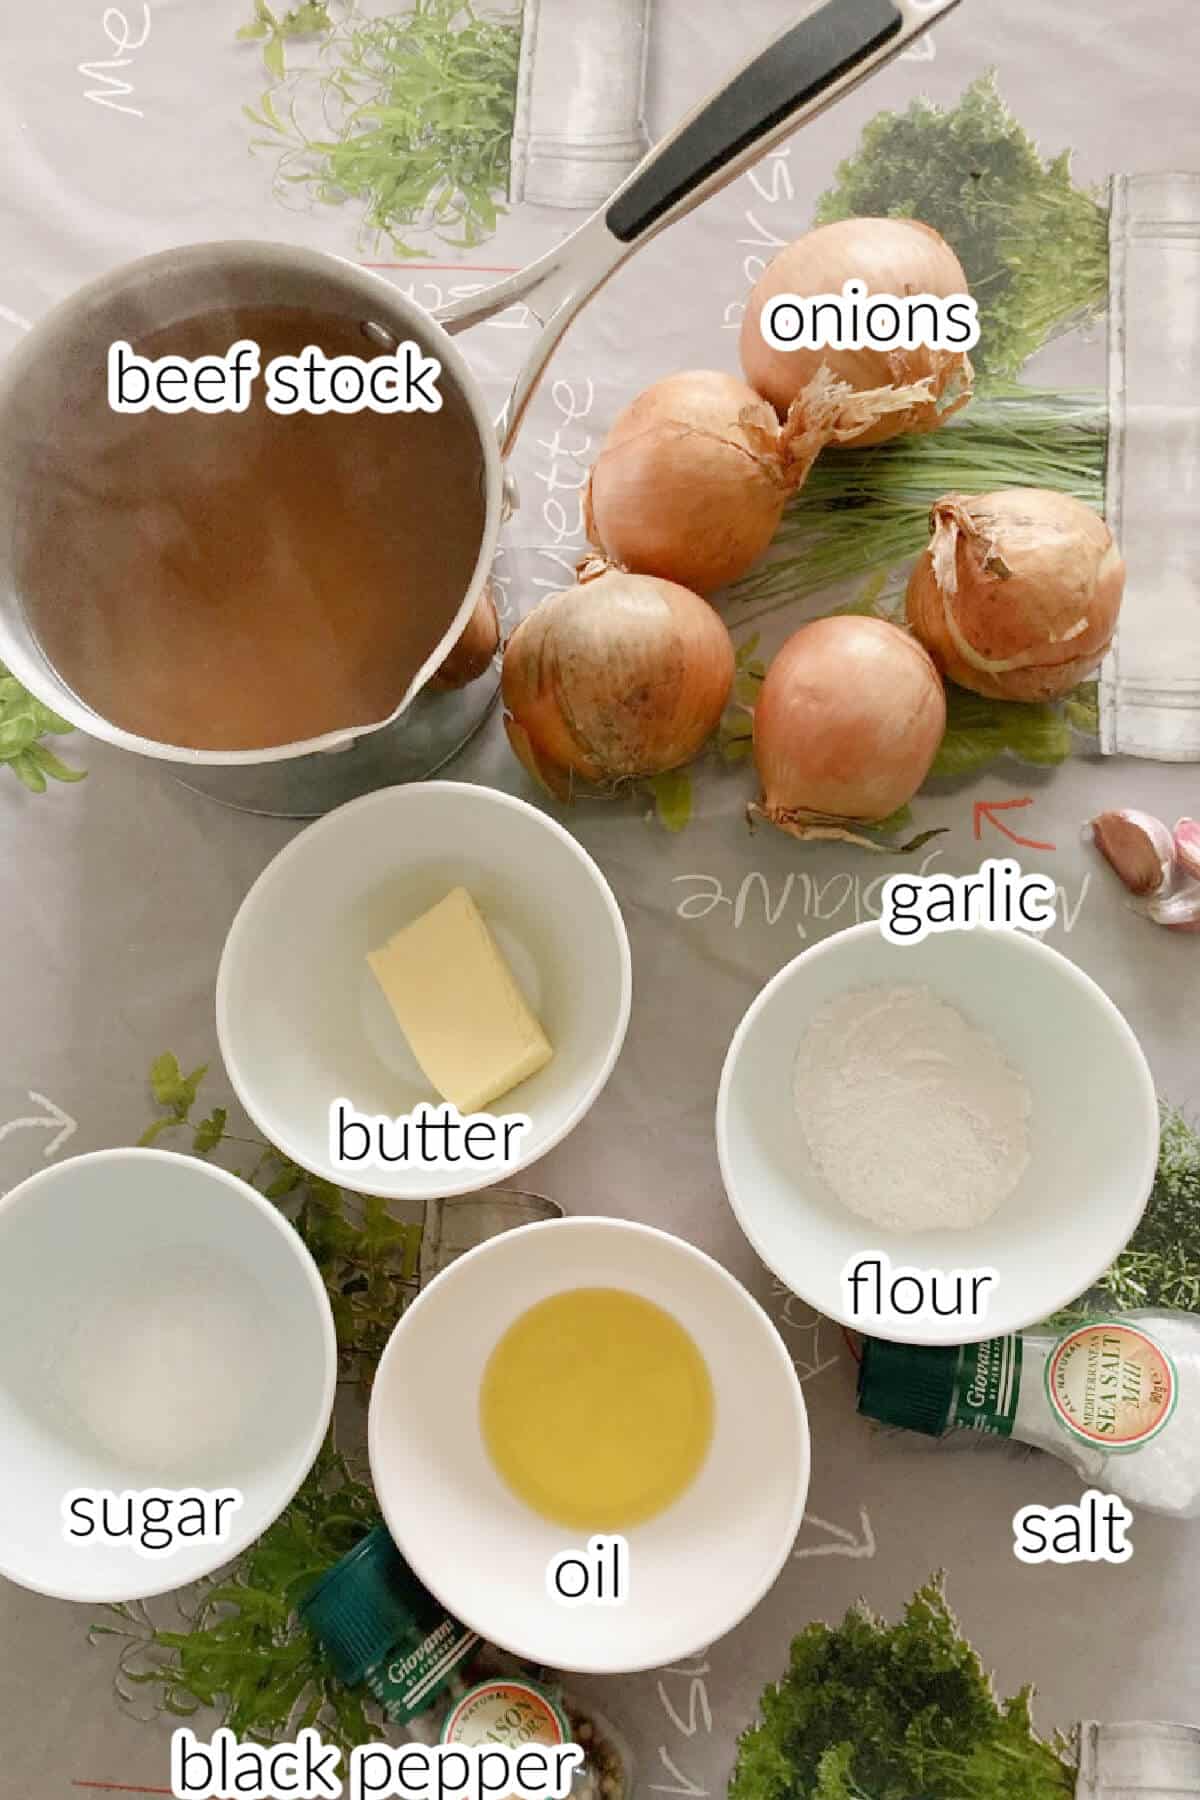 Ingredients needed to make onion soup.